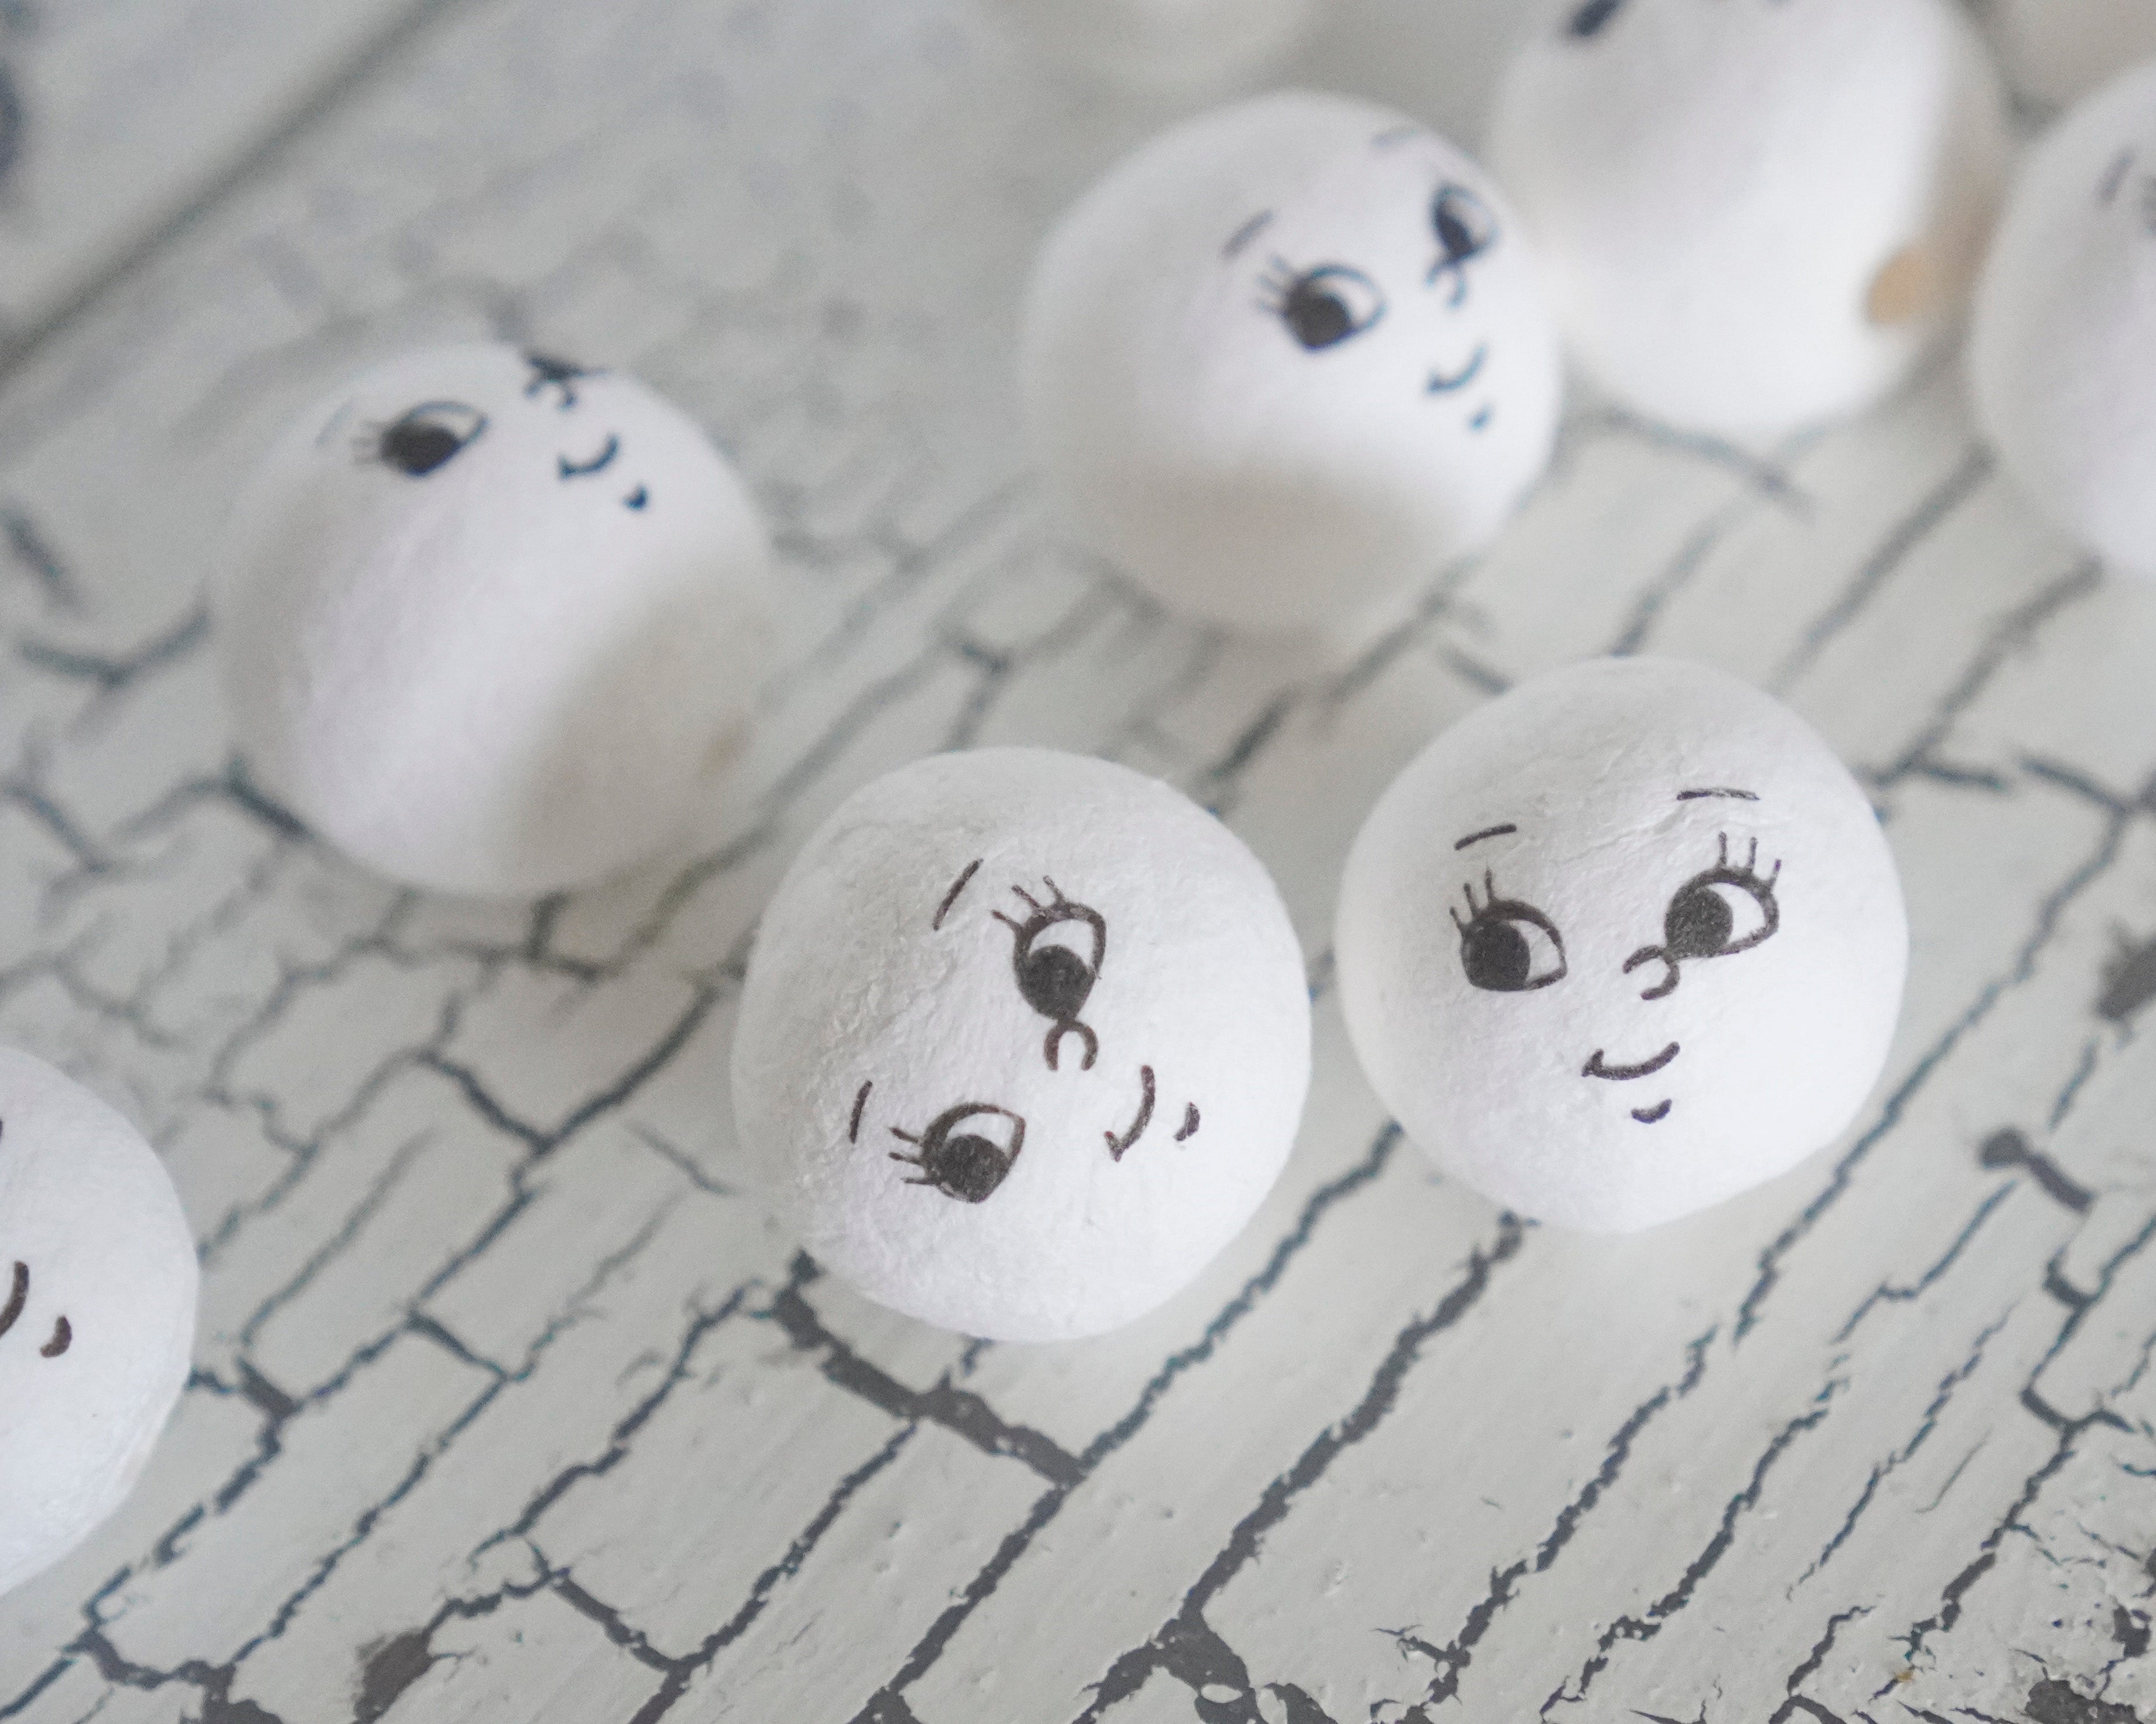 20mm Spun Cotton Heads: BRIGHT EYES - Vintage-Style Craft Heads with Faces, 12 Pcs.